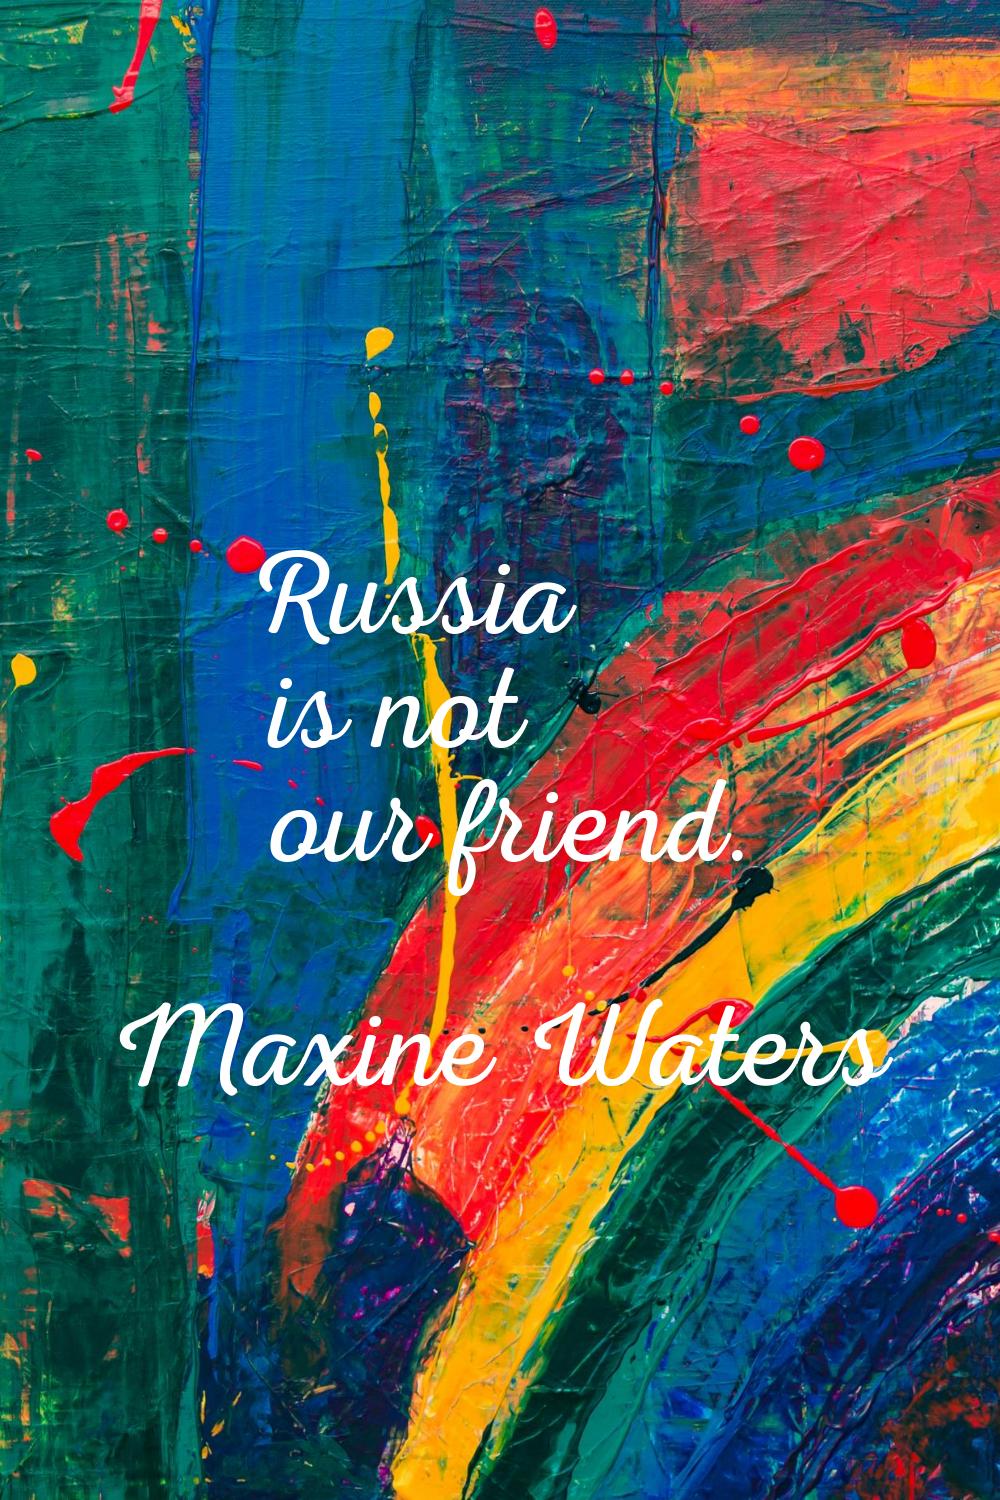 Russia is not our friend.